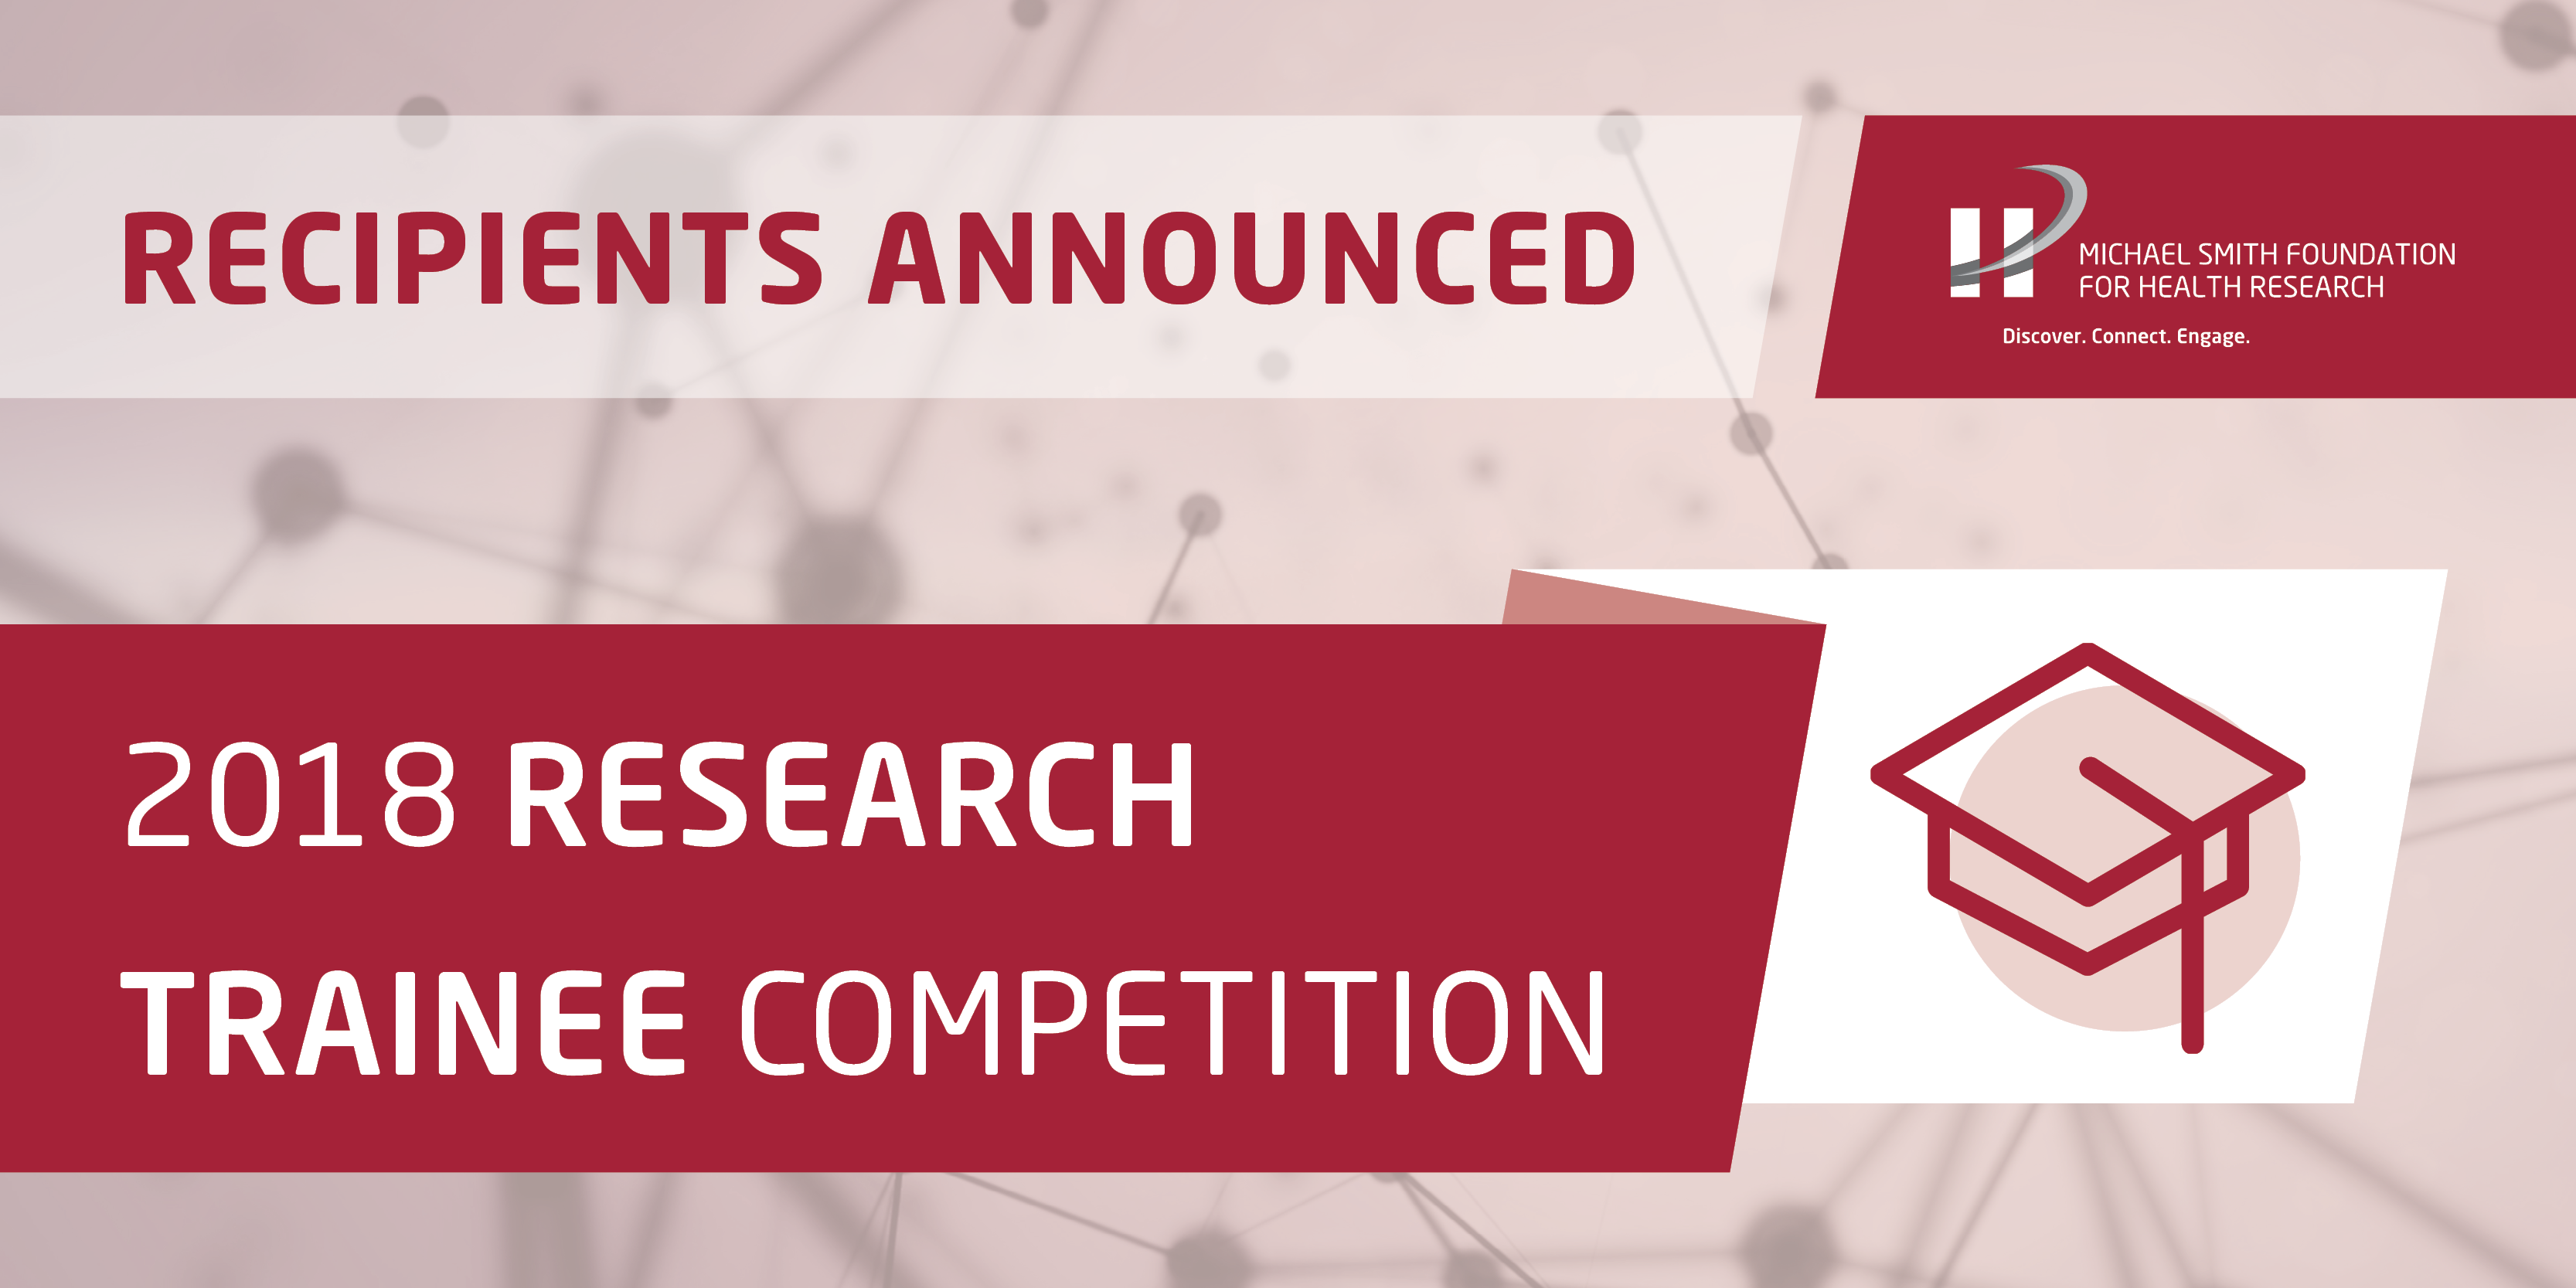 34 post-doctoral fellows funded in MSFHR’s 2018 Research Trainee competition